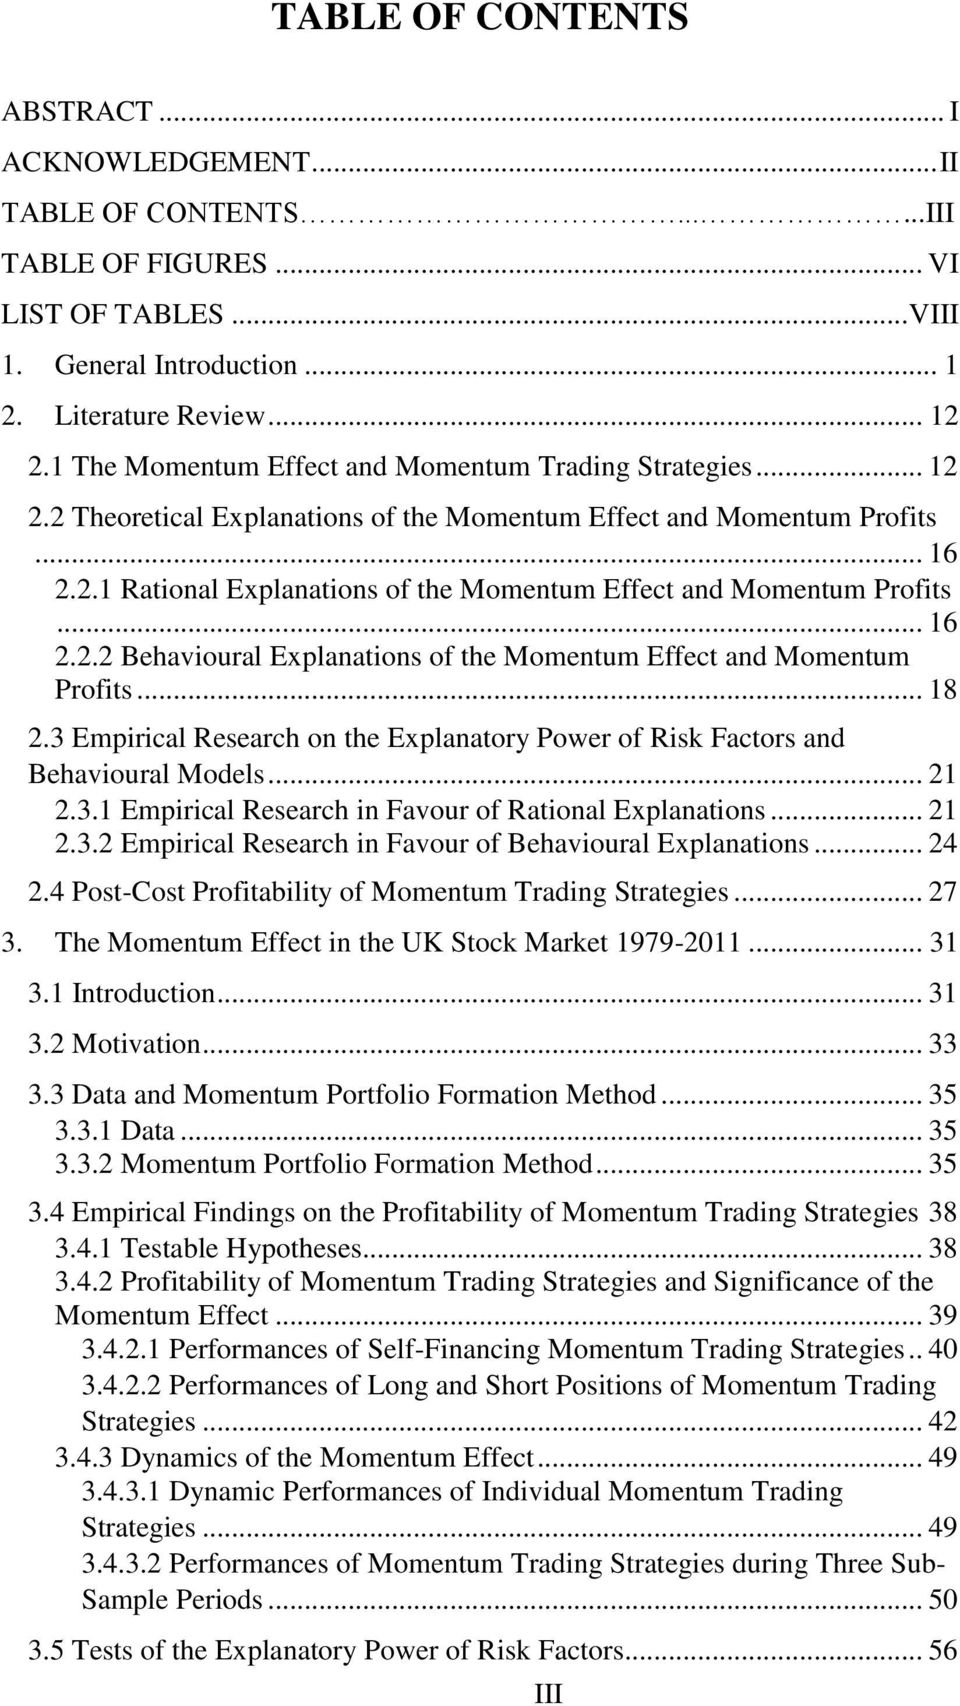 .. 16 2.2.2 Behavioural Explanations of the Momentum Effect and Momentum Profits... 18 2.3 Empirical Research on the Explanatory Power of Risk Factors and Behavioural Models... 21 2.3.1 Empirical Research in Favour of Rational Explanations.